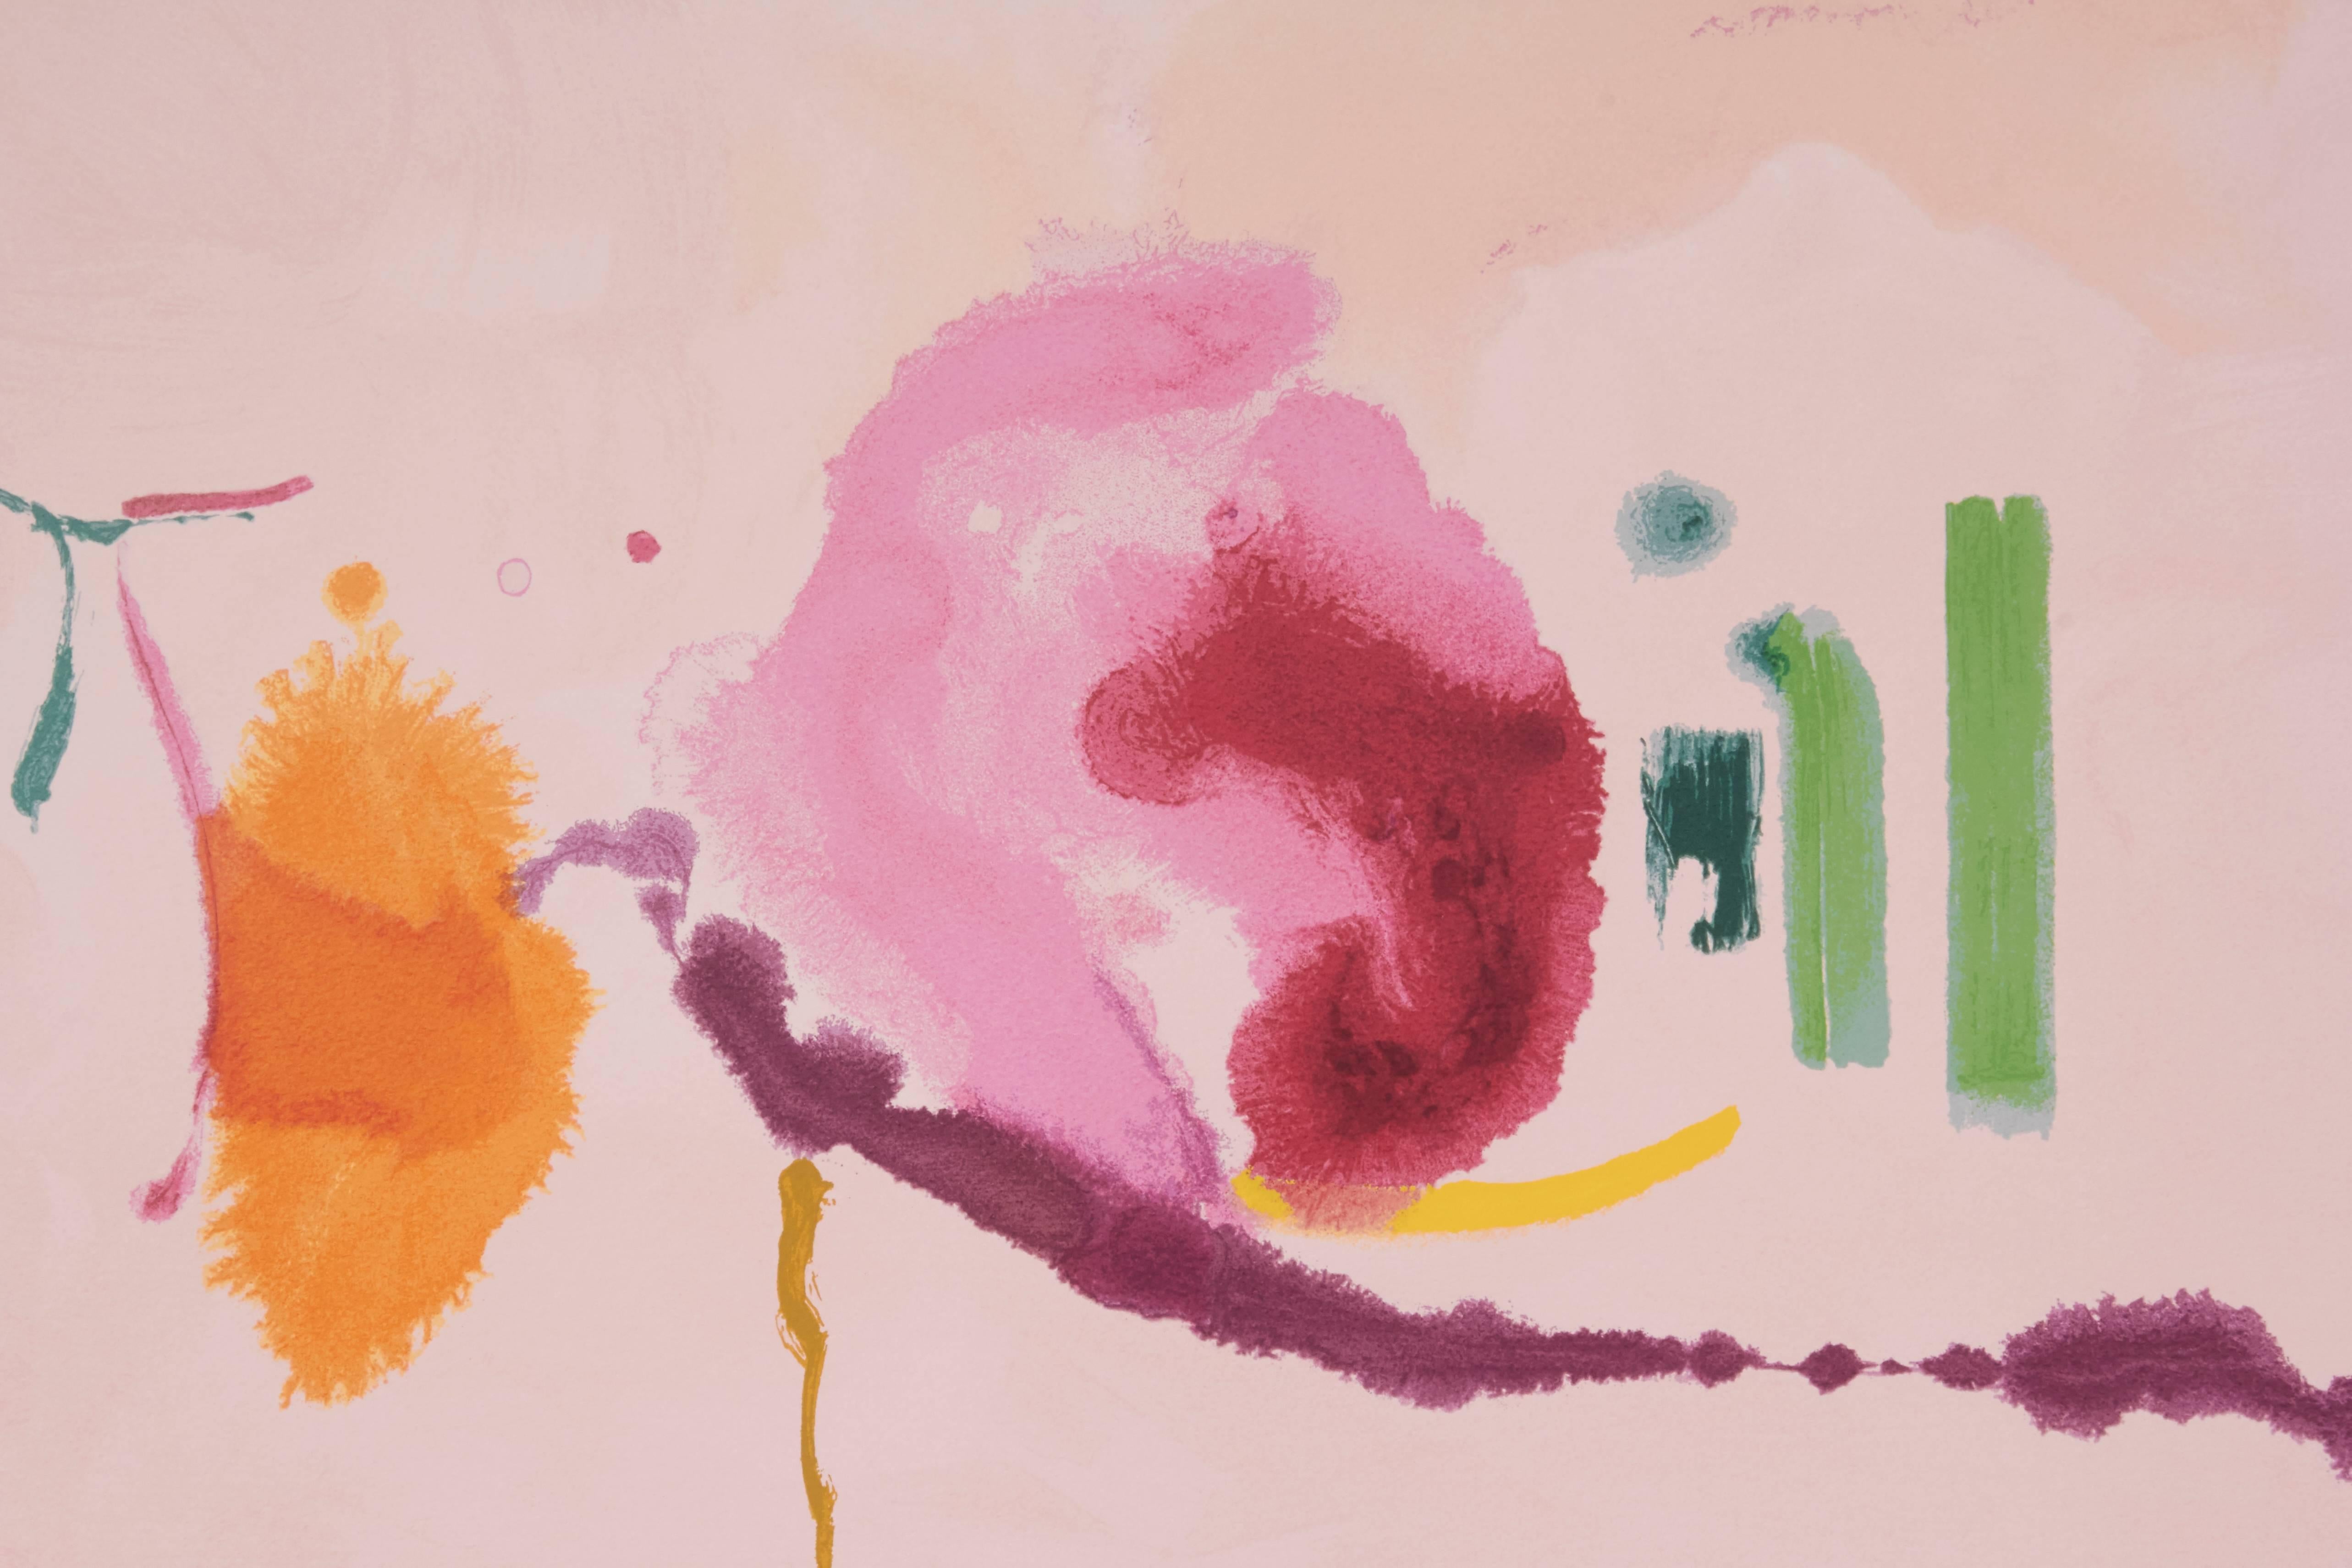 Helen Frankenthaler
Flirt
1995
Silkscreen
26 3/4  x 39 1/2 inches
Edition of 126
Signed twice and numbered